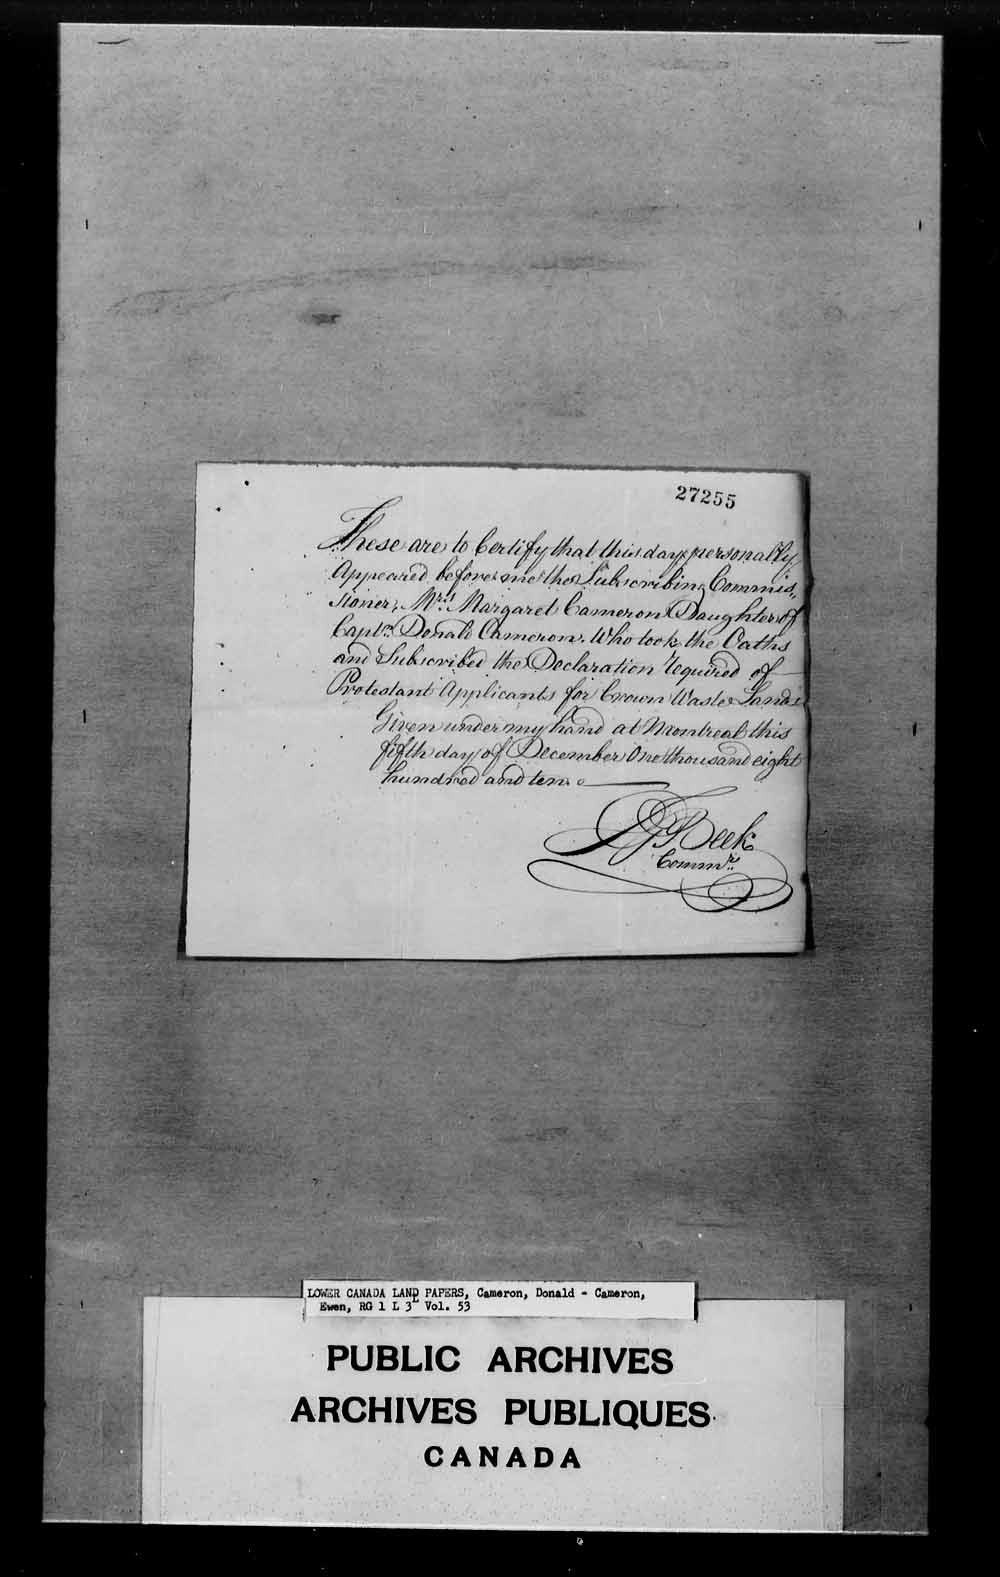 Digitized page of  for Image No.: e006611635